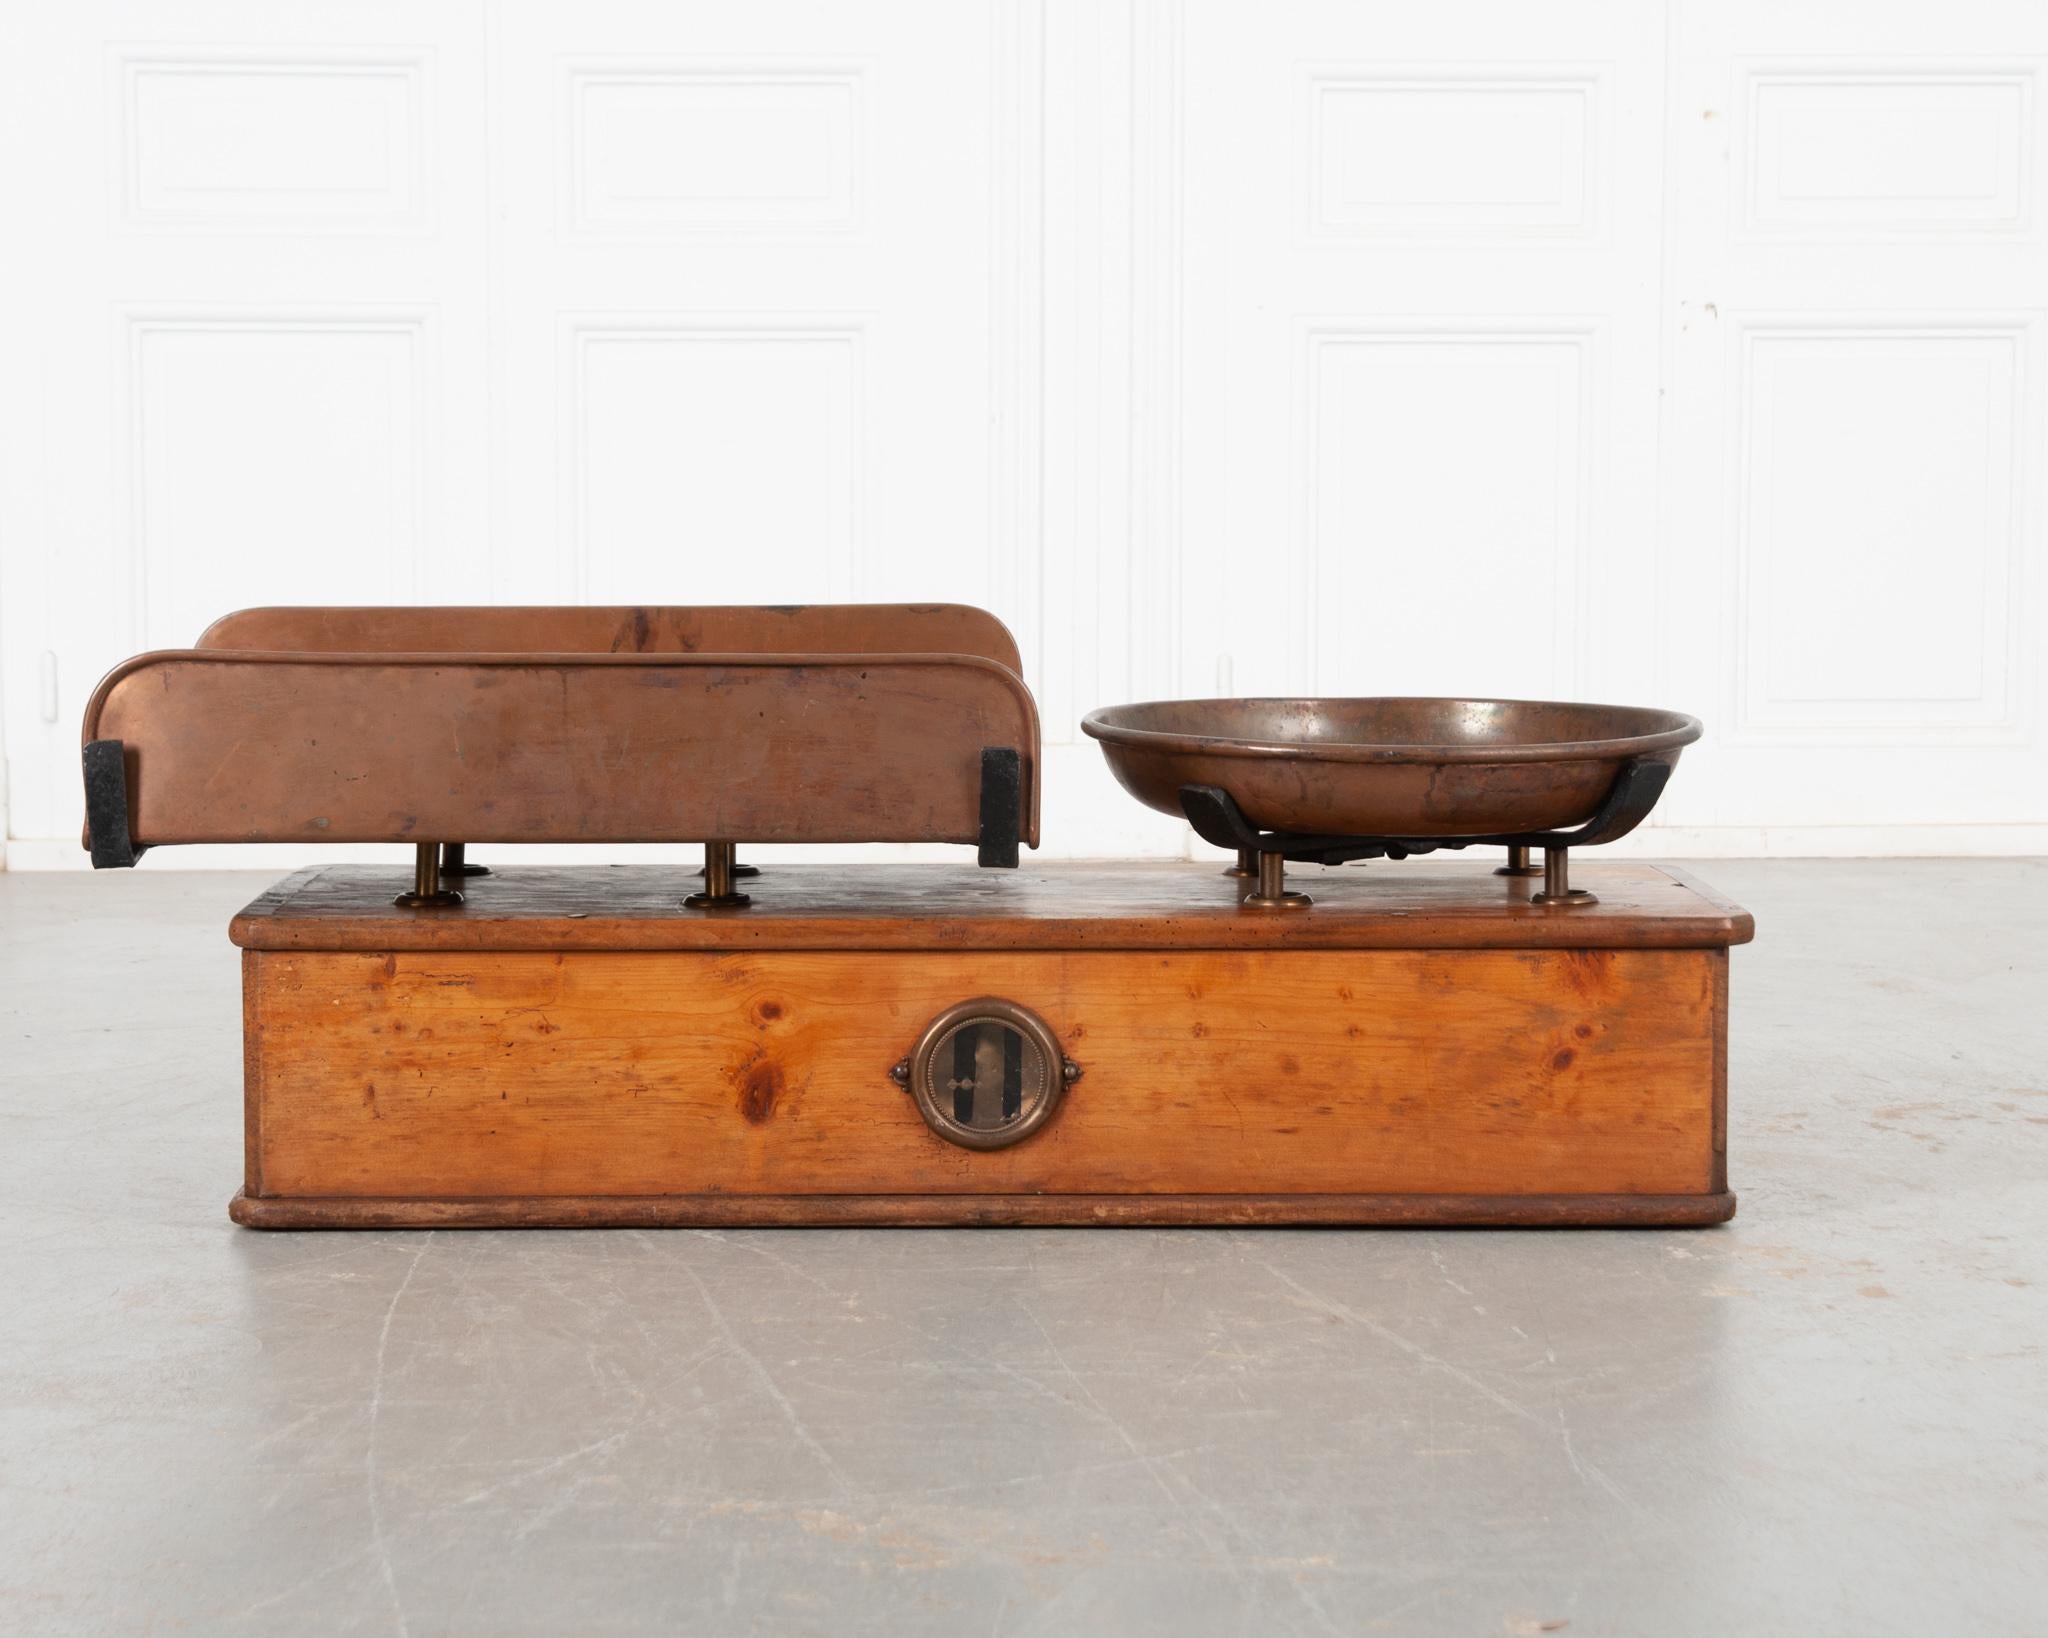 This massive culinary or produce scale from Lyon, France is the perfect antique accessory to elevate any kitchen. The base is made of solid waxed pine with a fantastic vibrant patina. Its sizable, heavy copper trays have aged wonderfully and bear